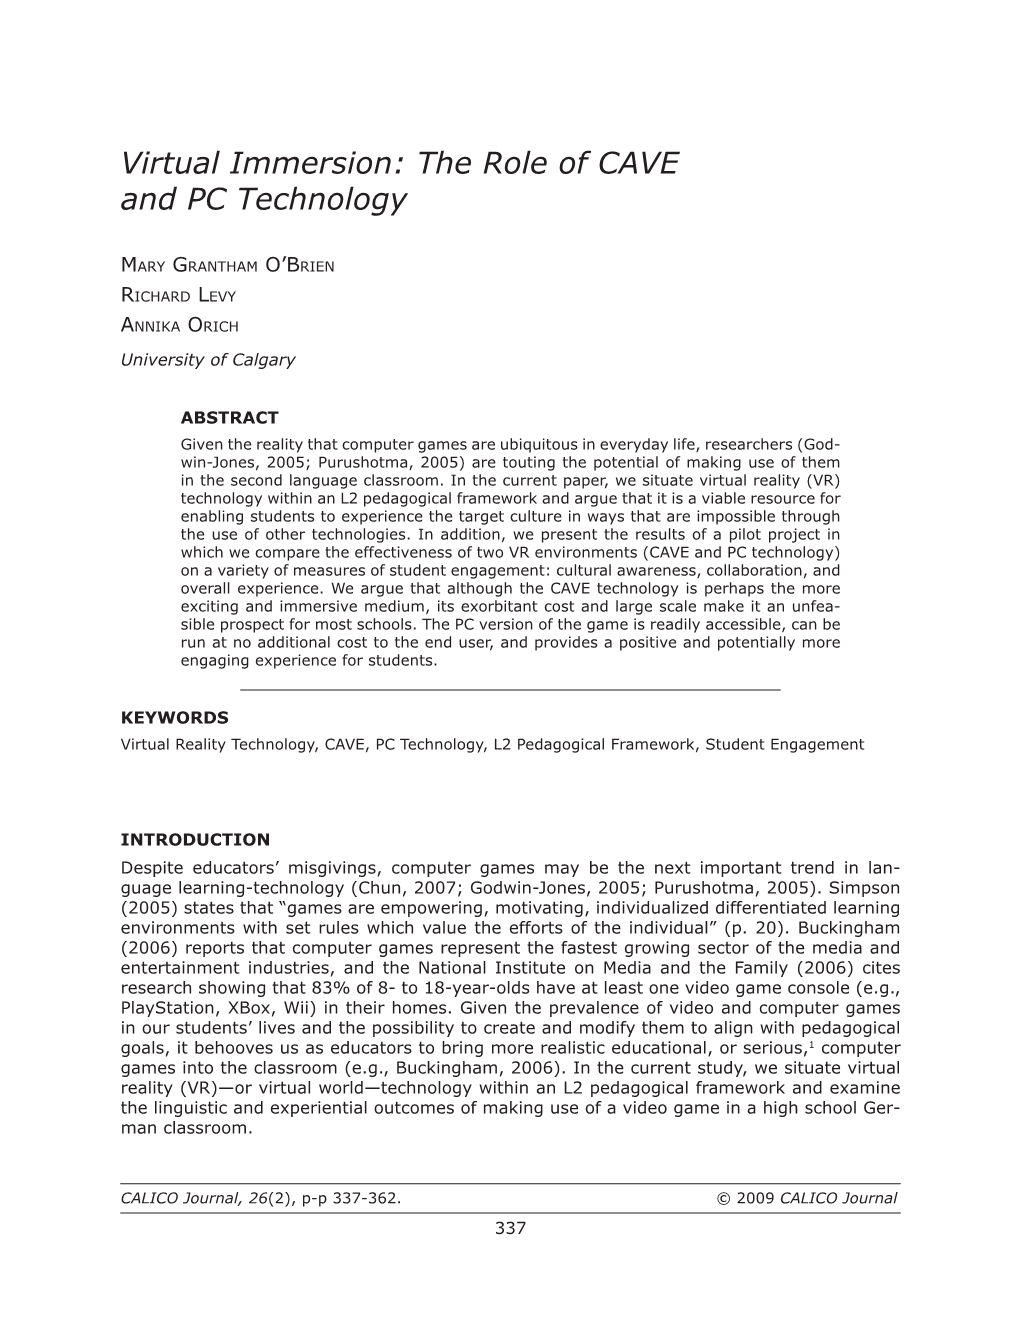 Virtual Immersion: the Role of CAVE and PC Technology